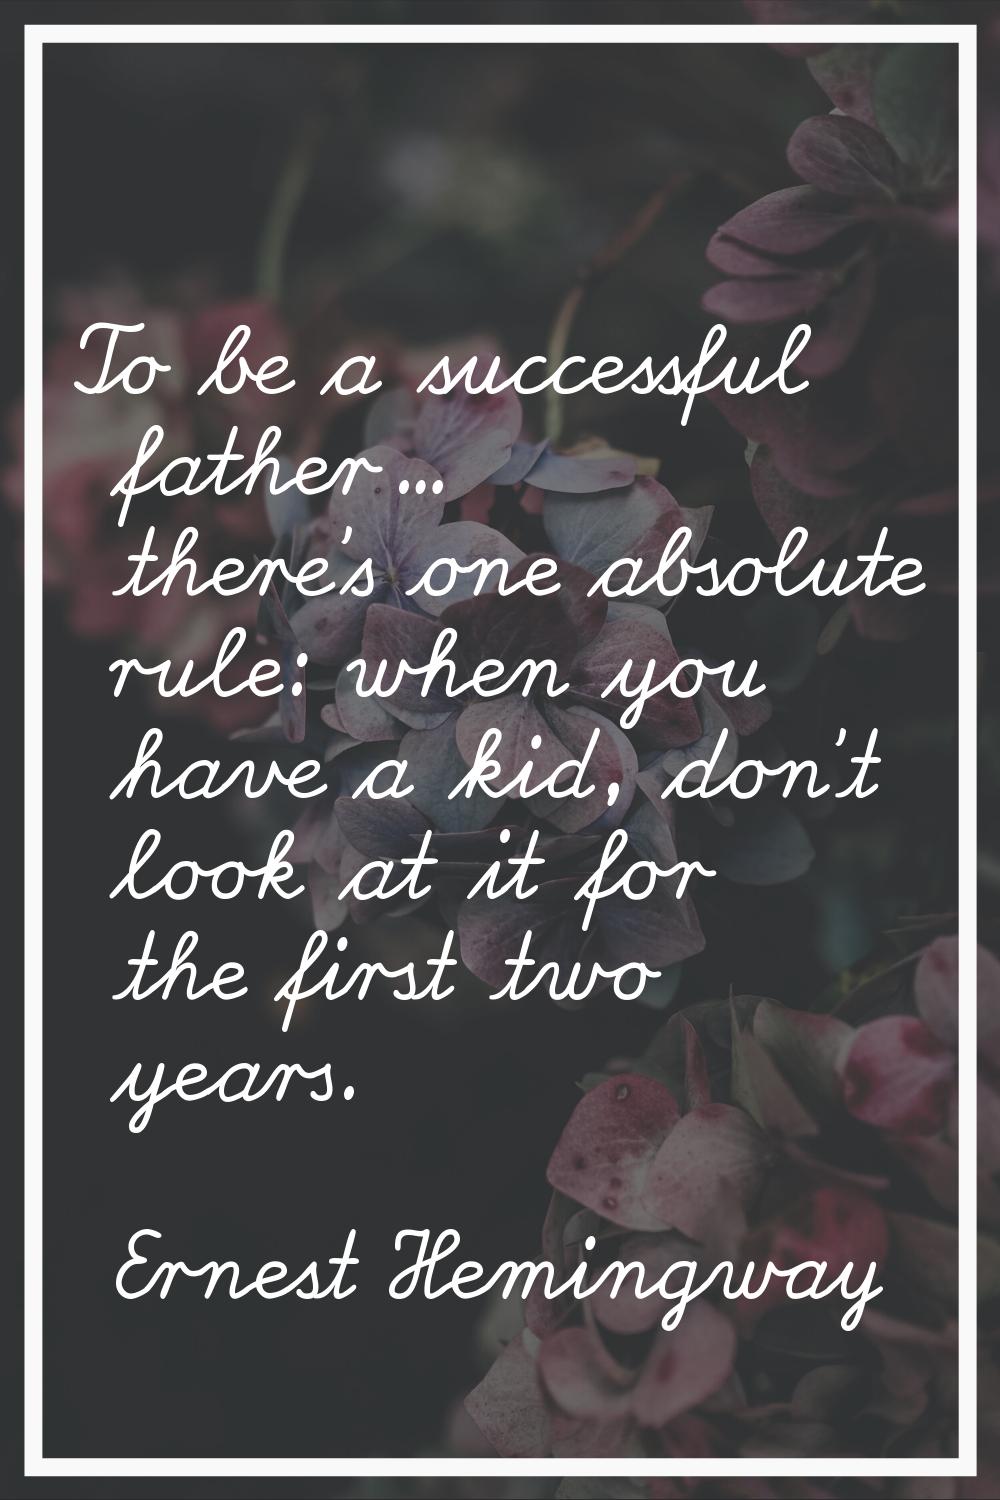 To be a successful father... there's one absolute rule: when you have a kid, don't look at it for t